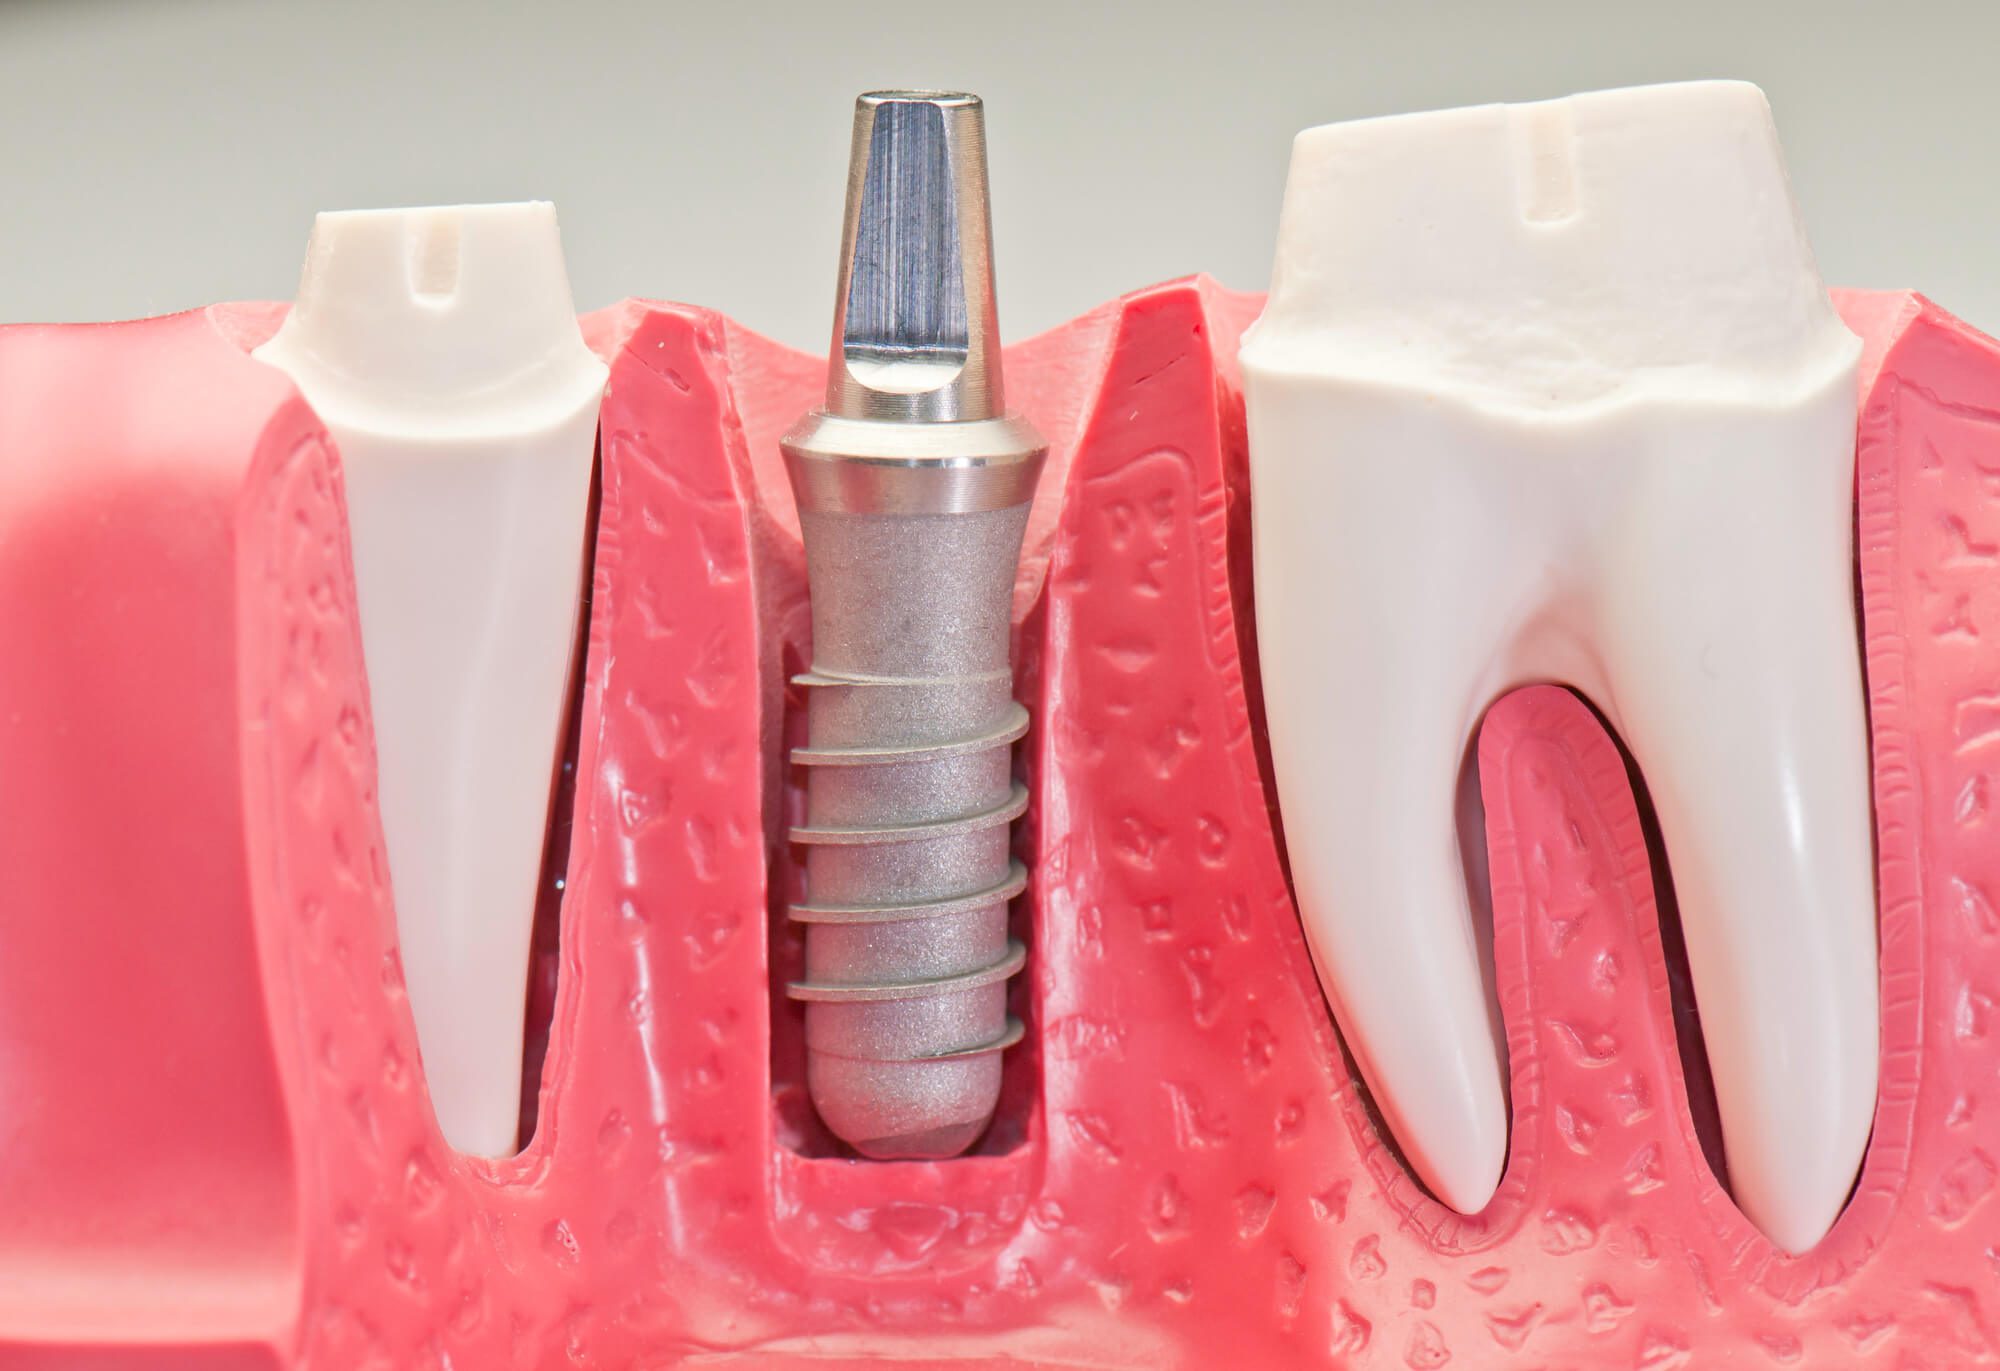 where can i get dental implants in fort pierce fl?